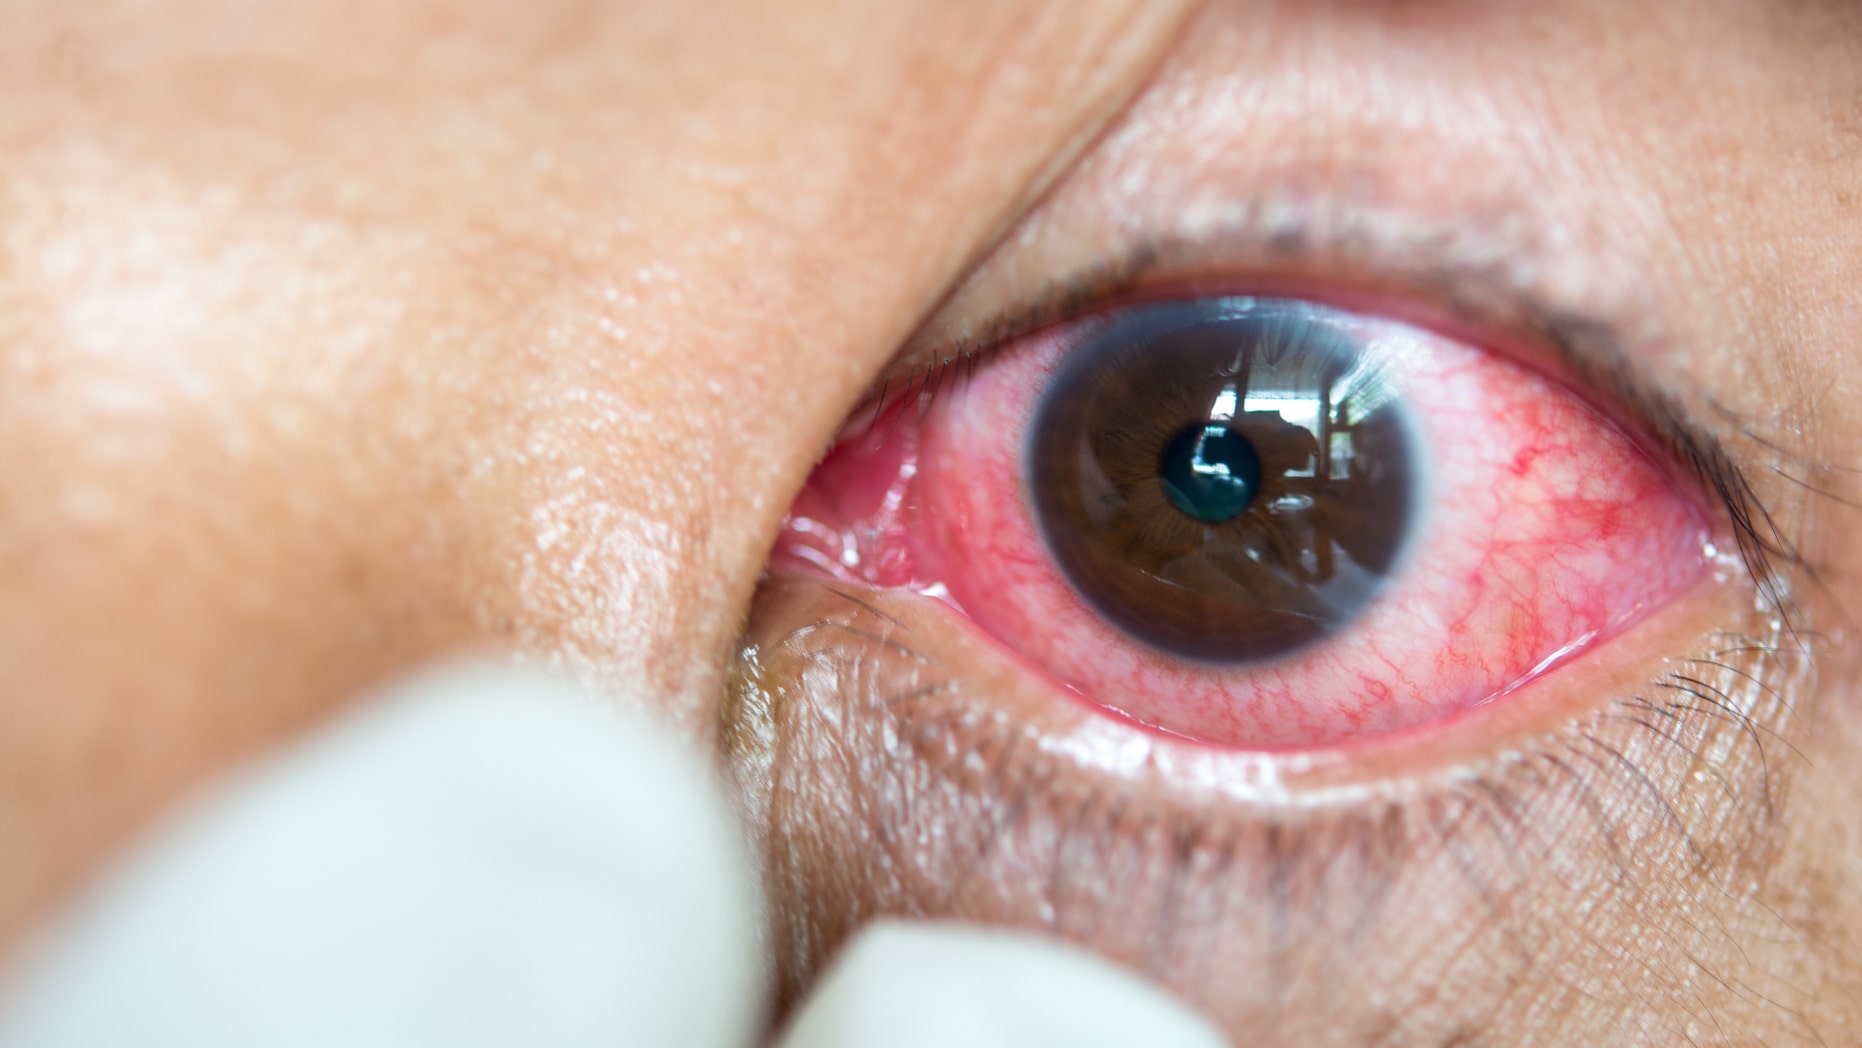 Sleeping in contacts could result in serious eye infections